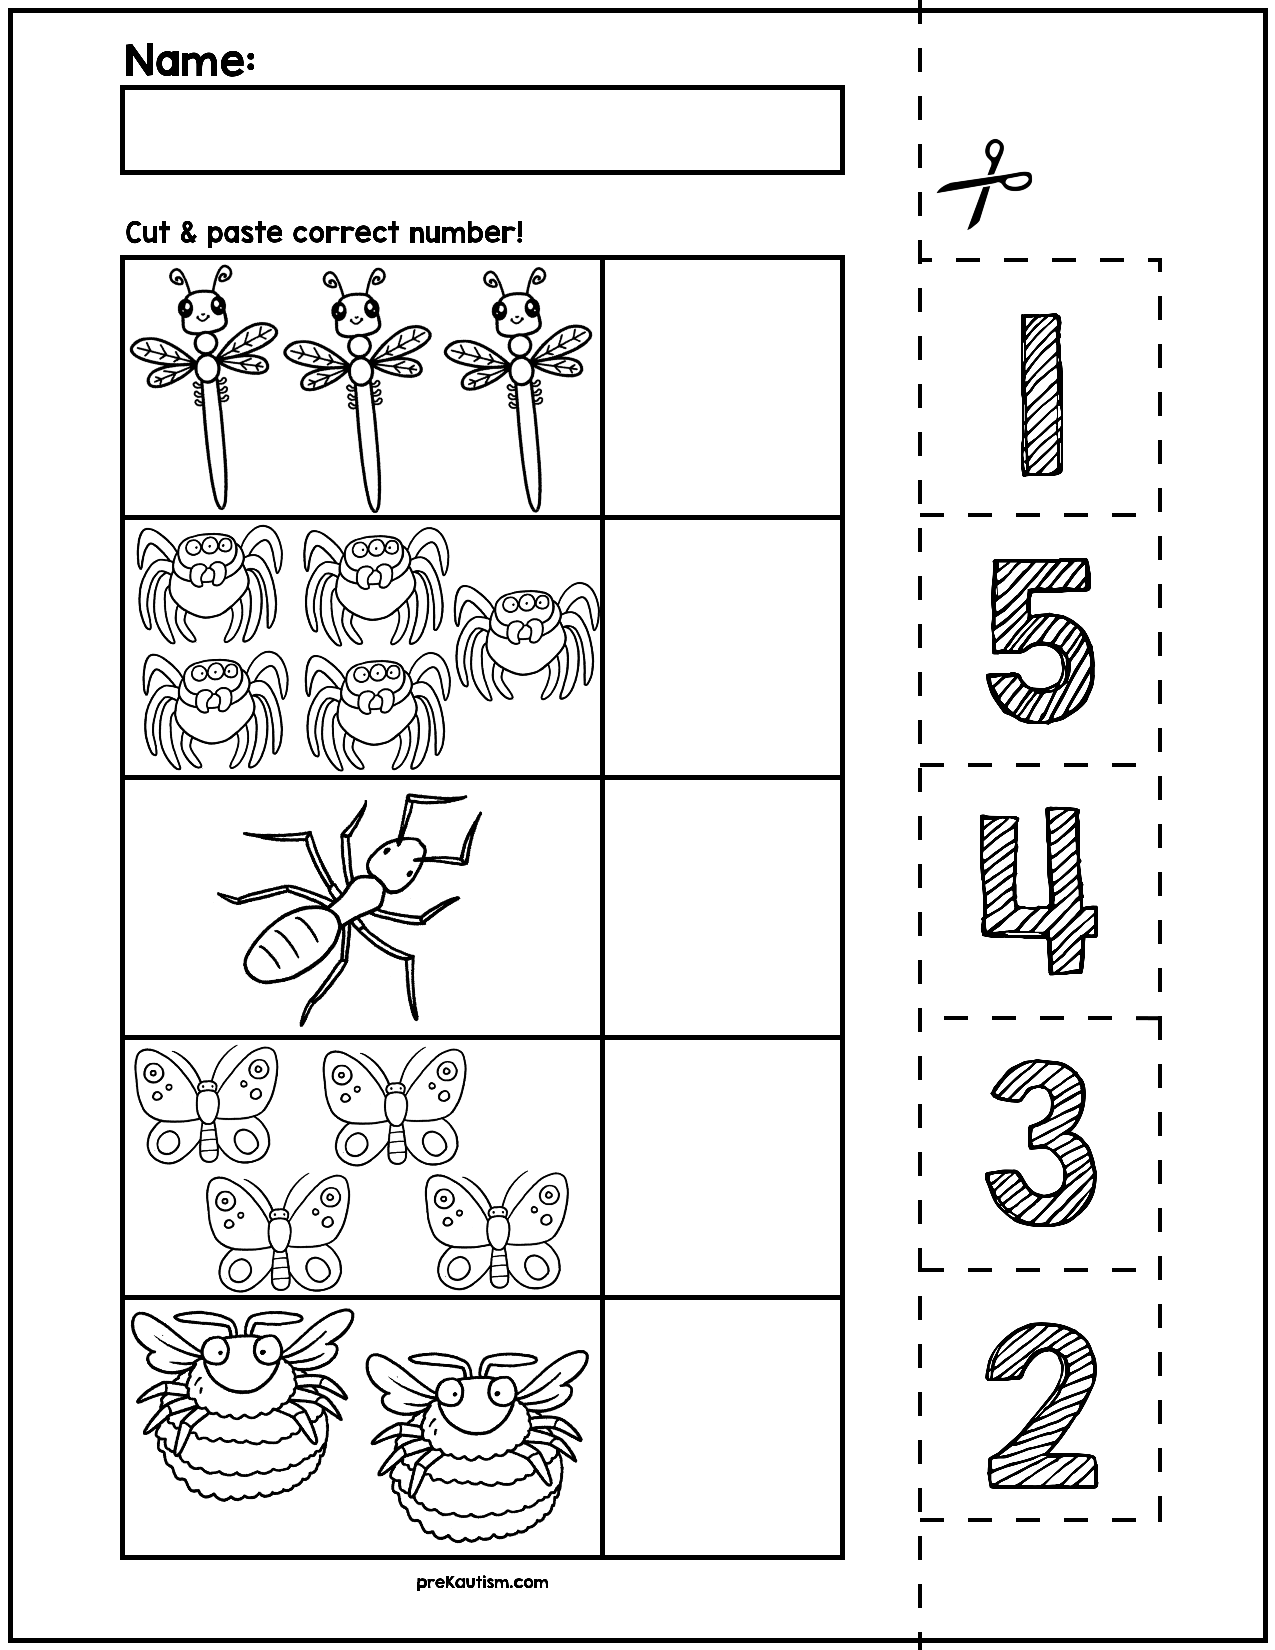 Insect Counting Numbers 1-5 Worksheets - WorksheetsCity